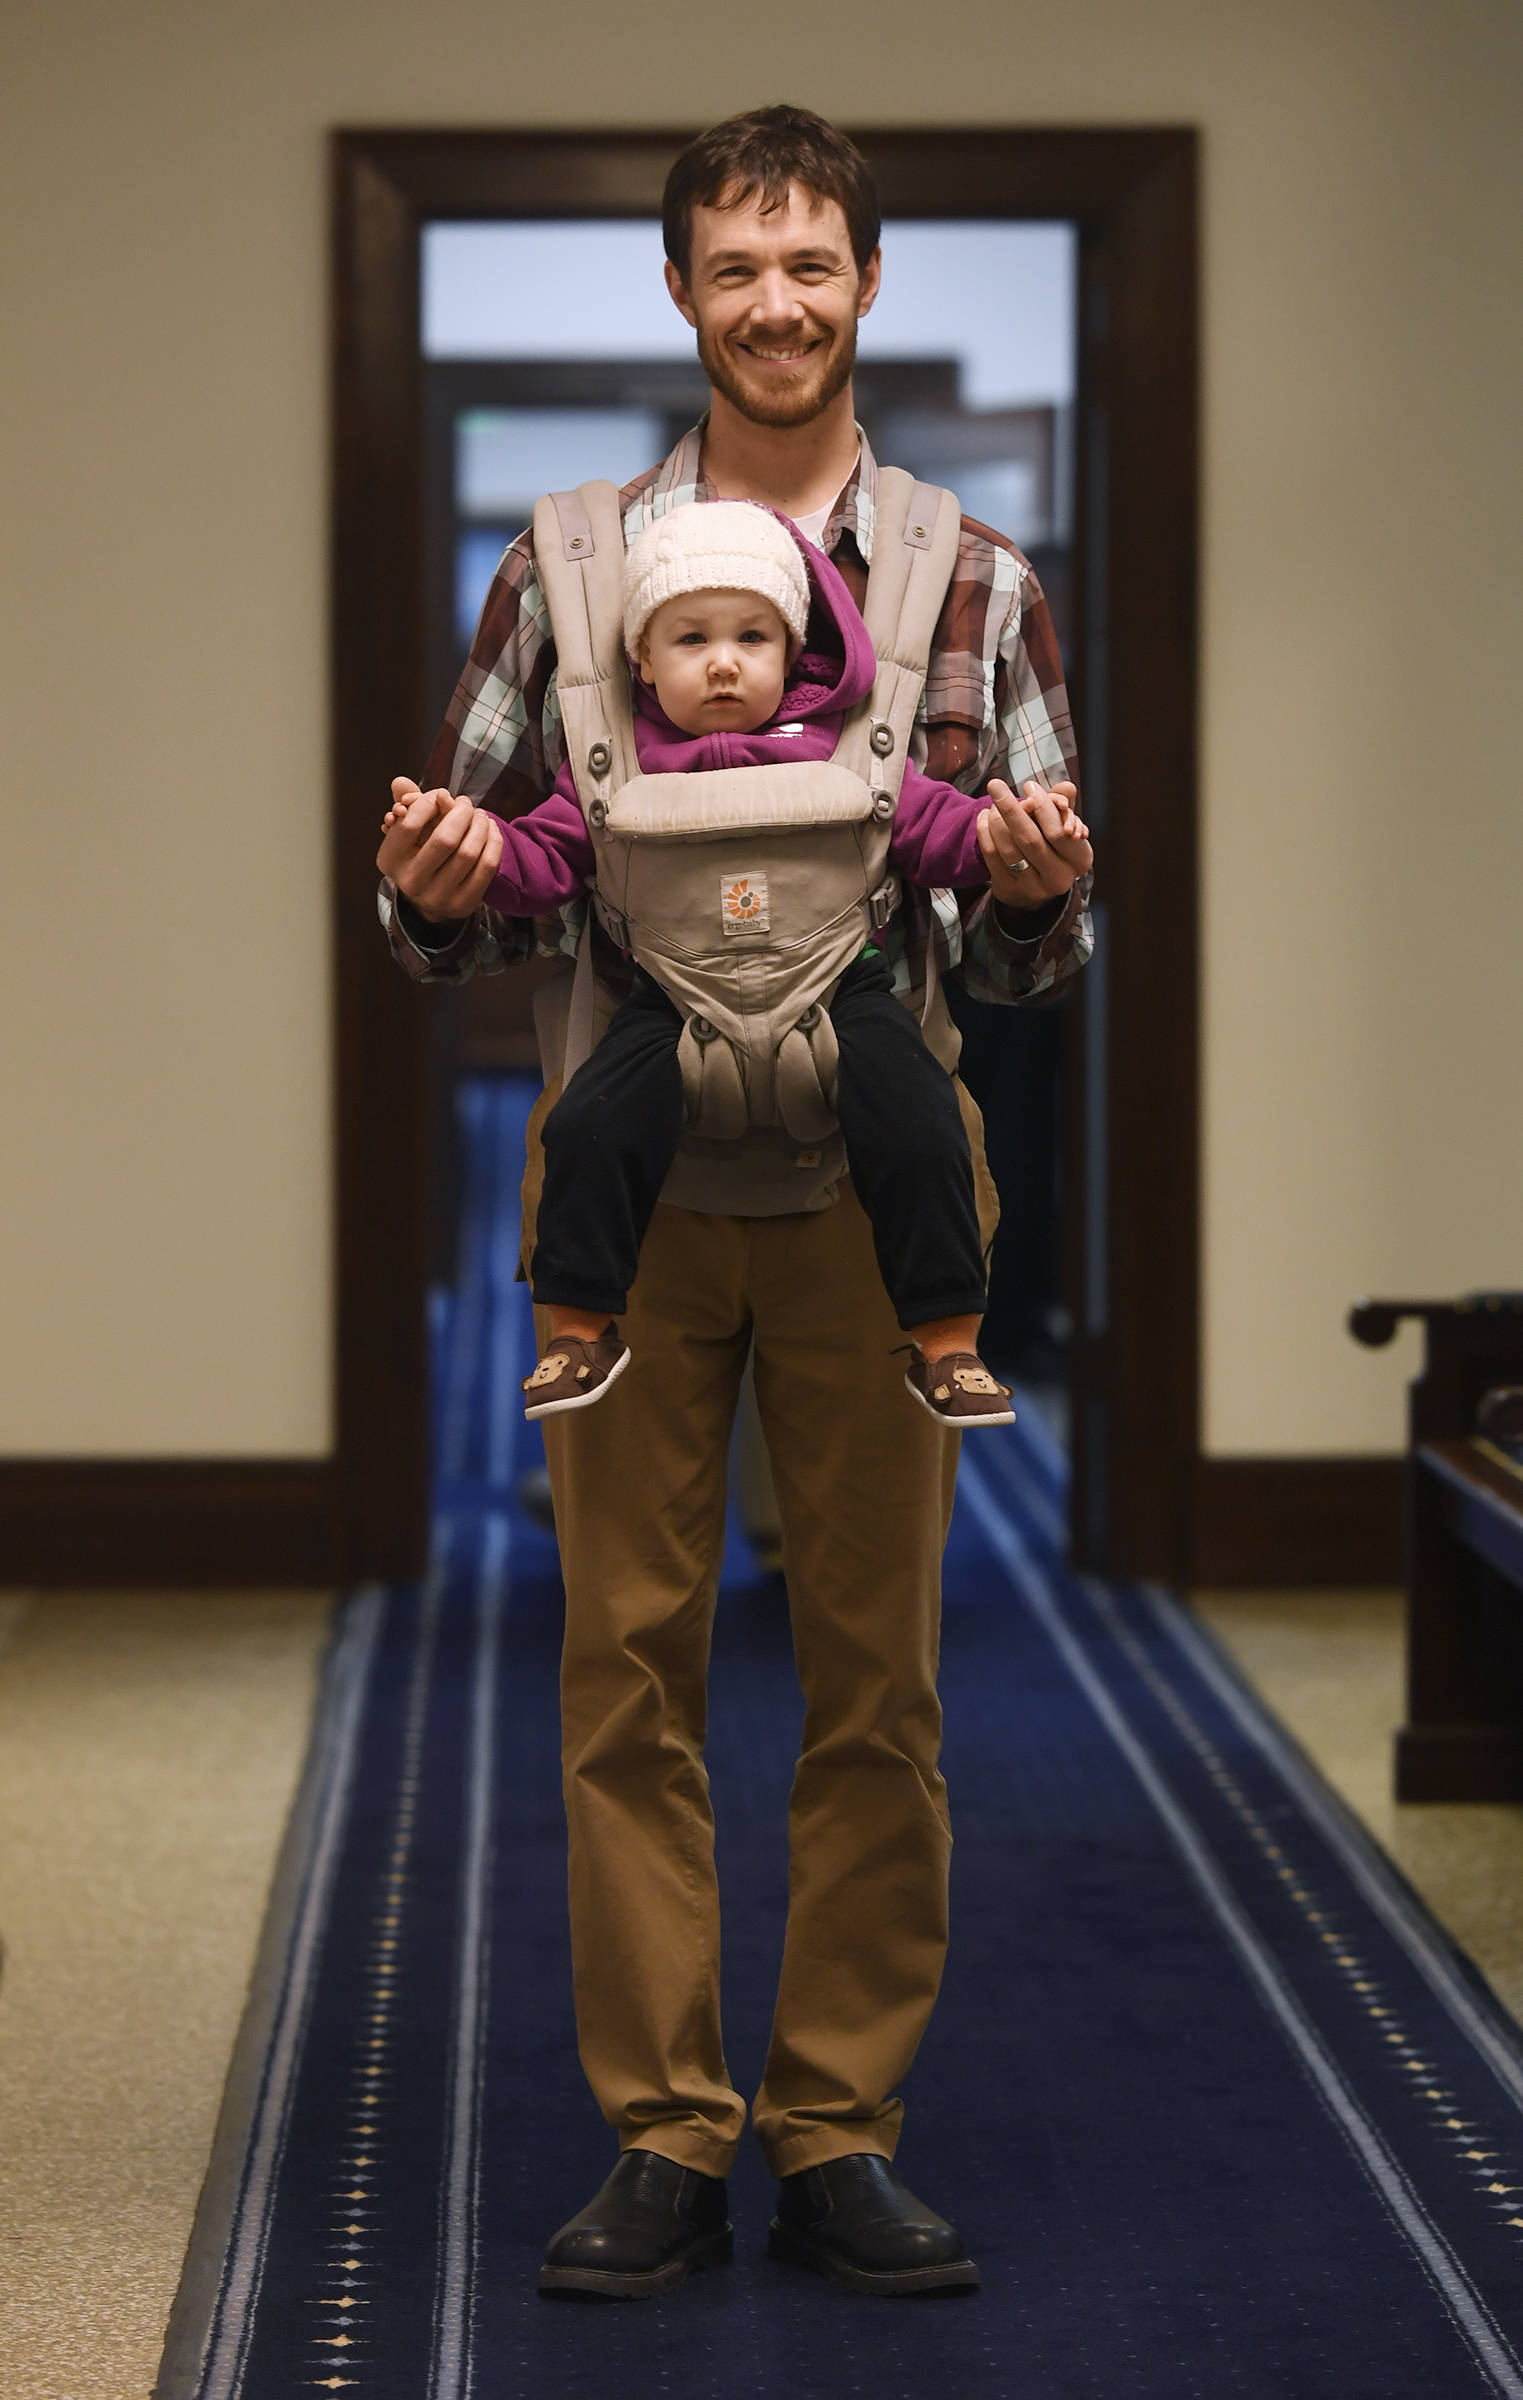 Rep. Zack Fields, D-Anchorage, carries his 14-month-old daughter, Zara, along with him as he works at the Capitol on Tuesday, Feb. 5, 2019. (Michael Penn | Juneau Empire)